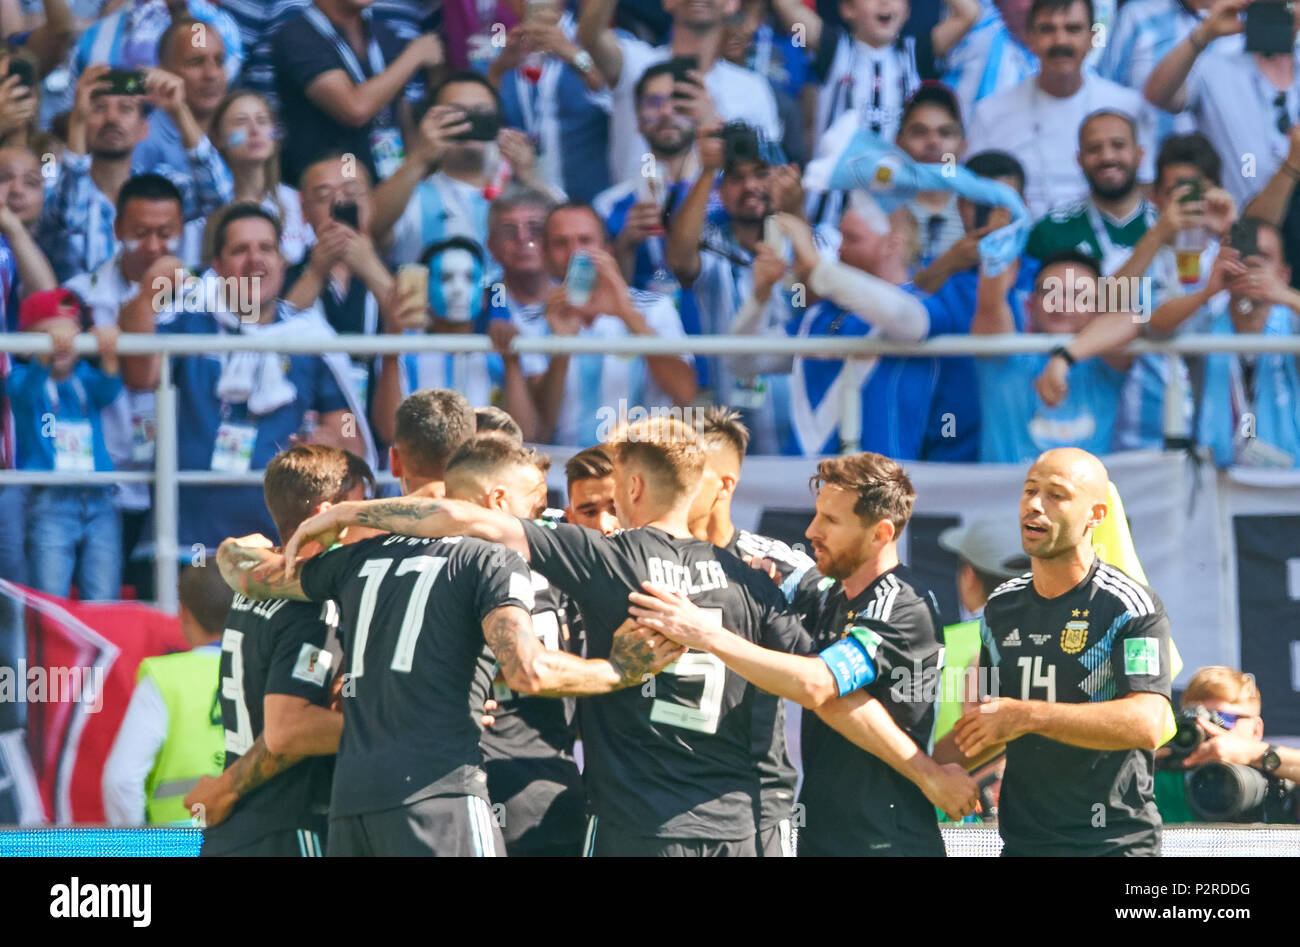 Moscow, Russia. 16th Jun, 2018. Argentina- Iceland, Soccer, Moscow, June 16, 2018 Sergio AGUERO, Argentina 19   celebrates his goal 1-0 with Lionel MESSI, Argentina  10  ARGENTINA - ICELAND FIFA WORLD CUP 2018 RUSSIA, Season 2018/2019,  June 16, 2018 S p a r t a k Stadium in Moscow, Russia.  © Peter Schatz / Alamy Live News Stock Photo